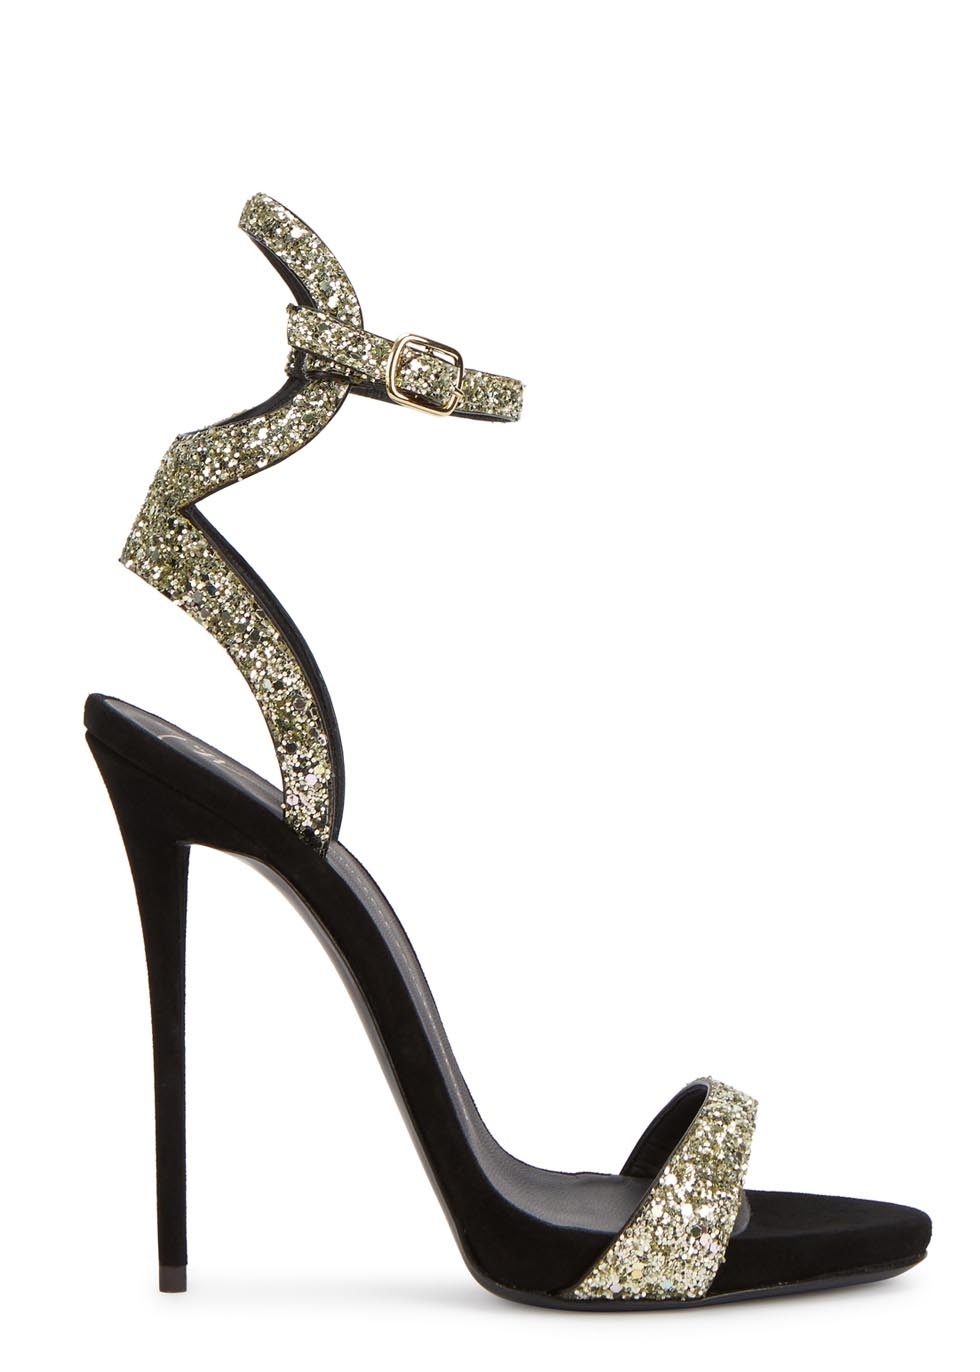 Coline black suede and glitter sandals